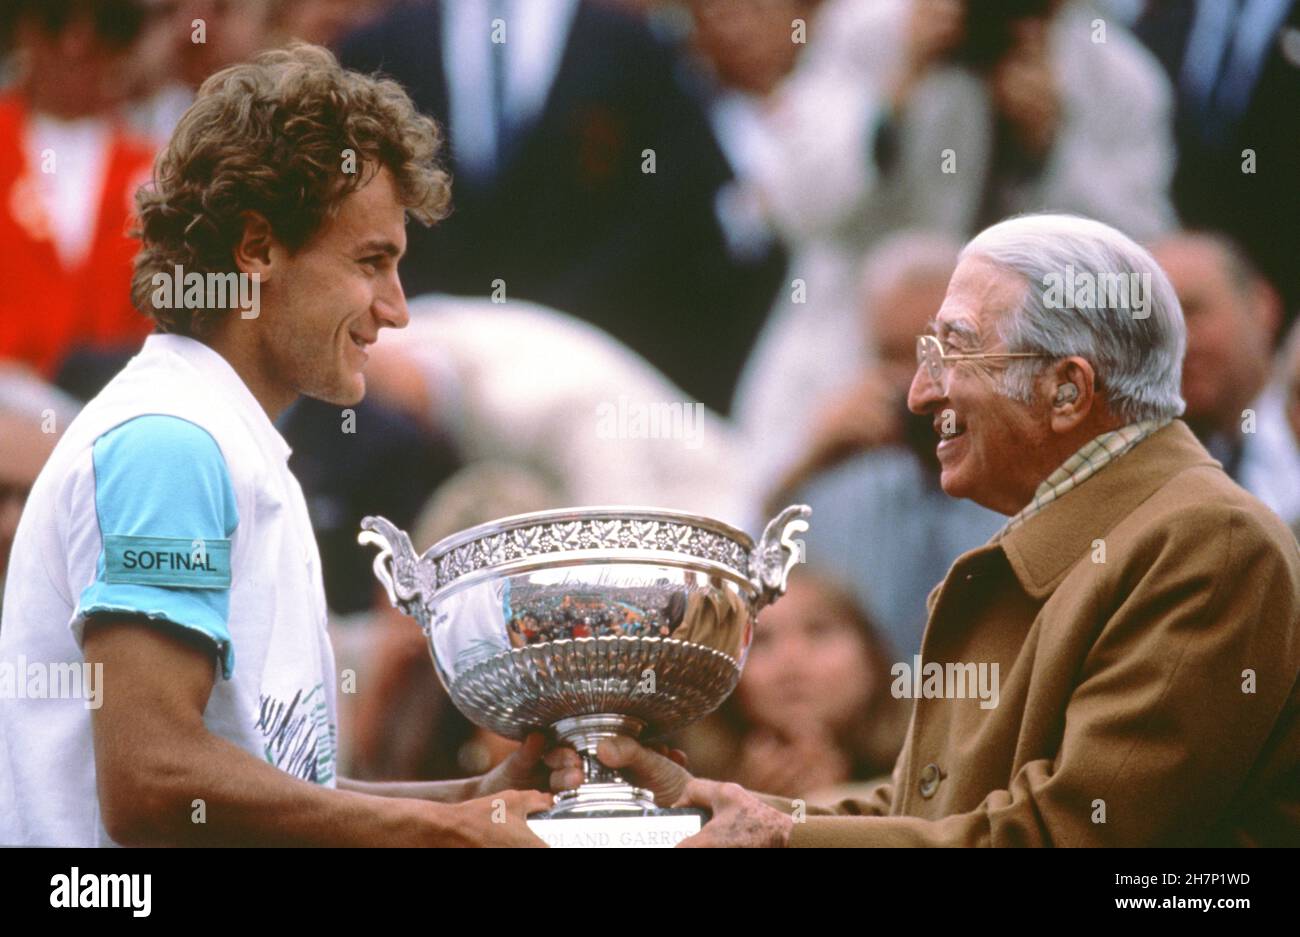 Swedish tennis player Mats Wilander receiving the Coupe des Mousquetaires from René Lacoste, after his victory in the men's singles final of the French Open tournament. Paris, Roland Garros, June 5, 1988 Stock Photo